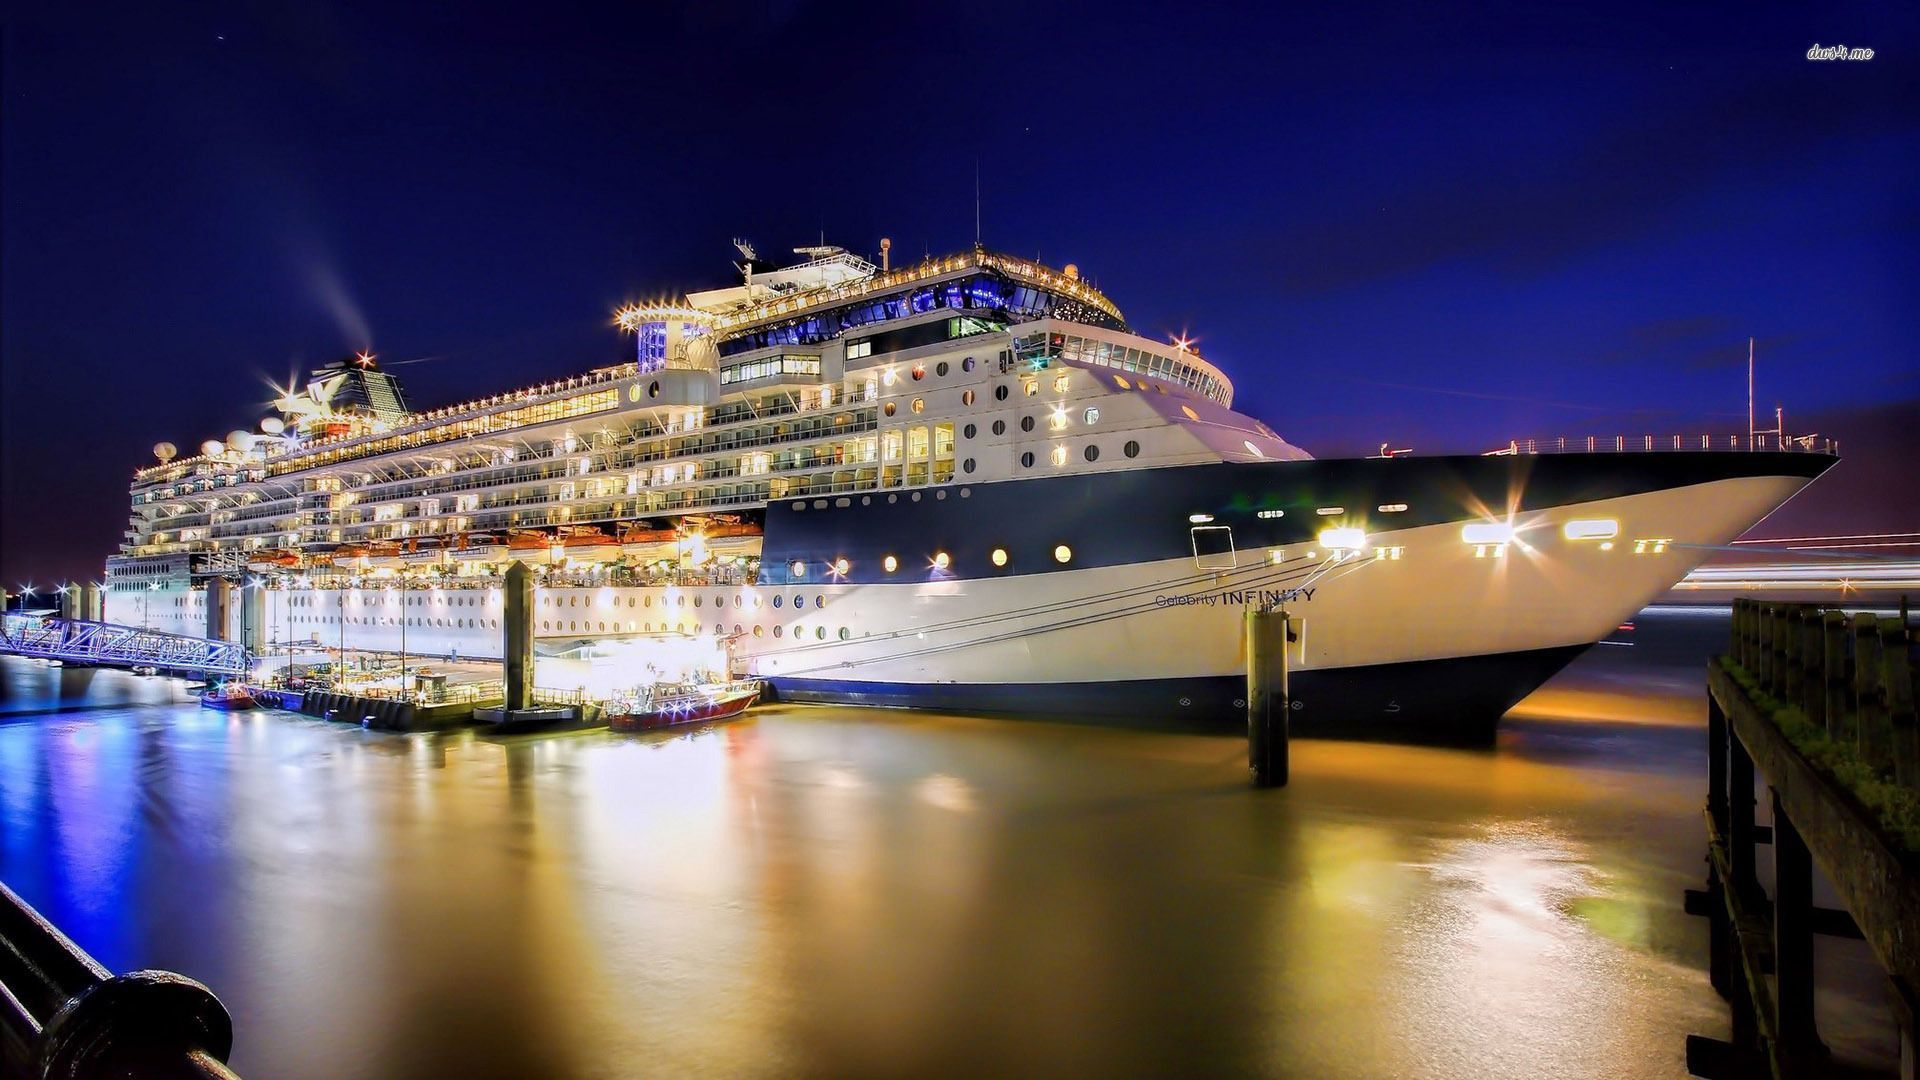 Cruise ship wallpaper - Photography wallpapers - #30085